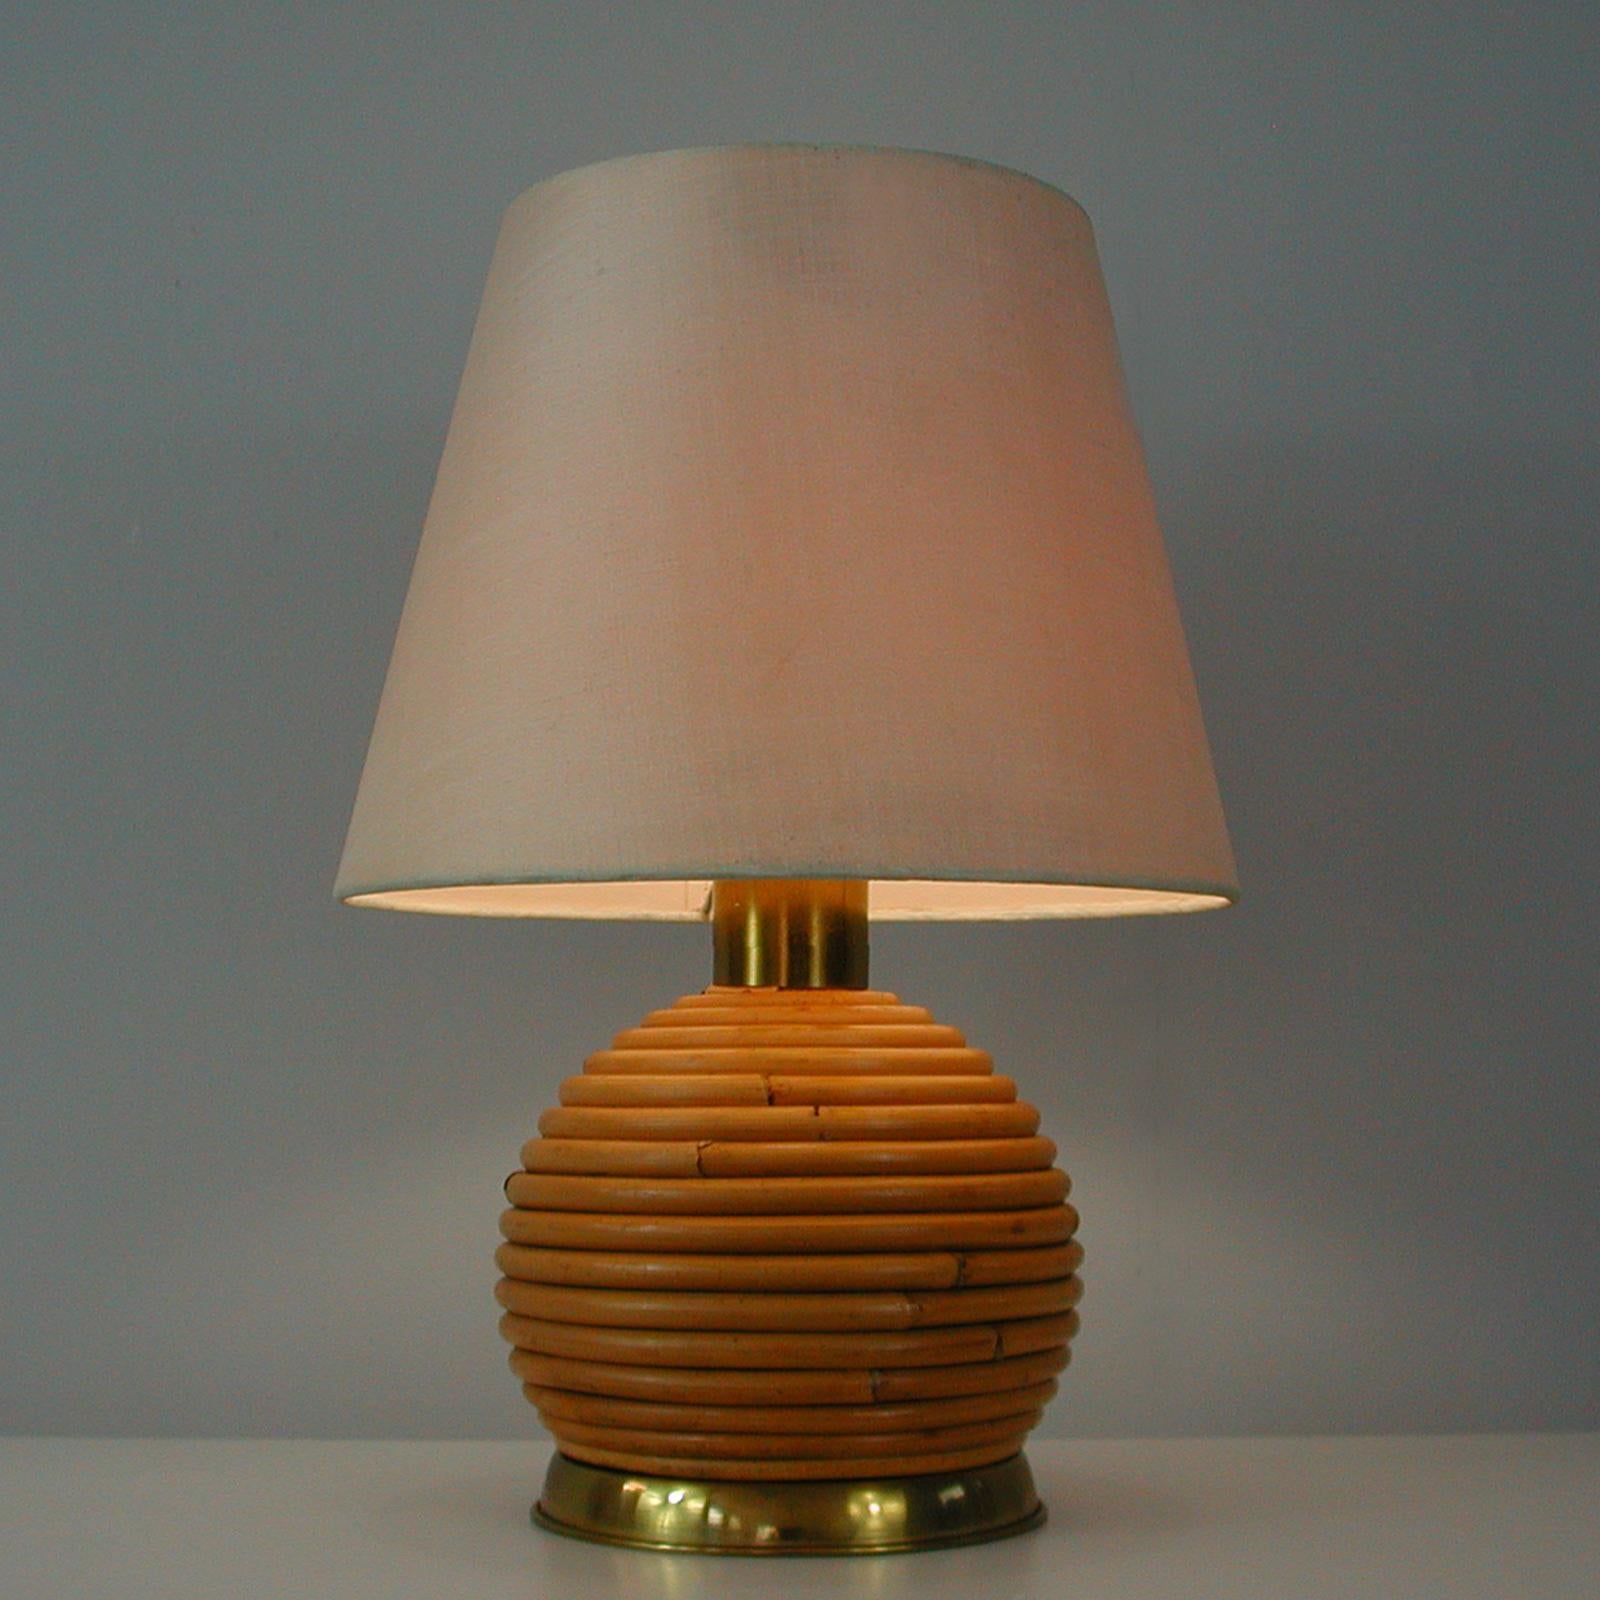 Swedish Midcentury Wicker and Brass Globe Table Lamp, 1960s For Sale 1